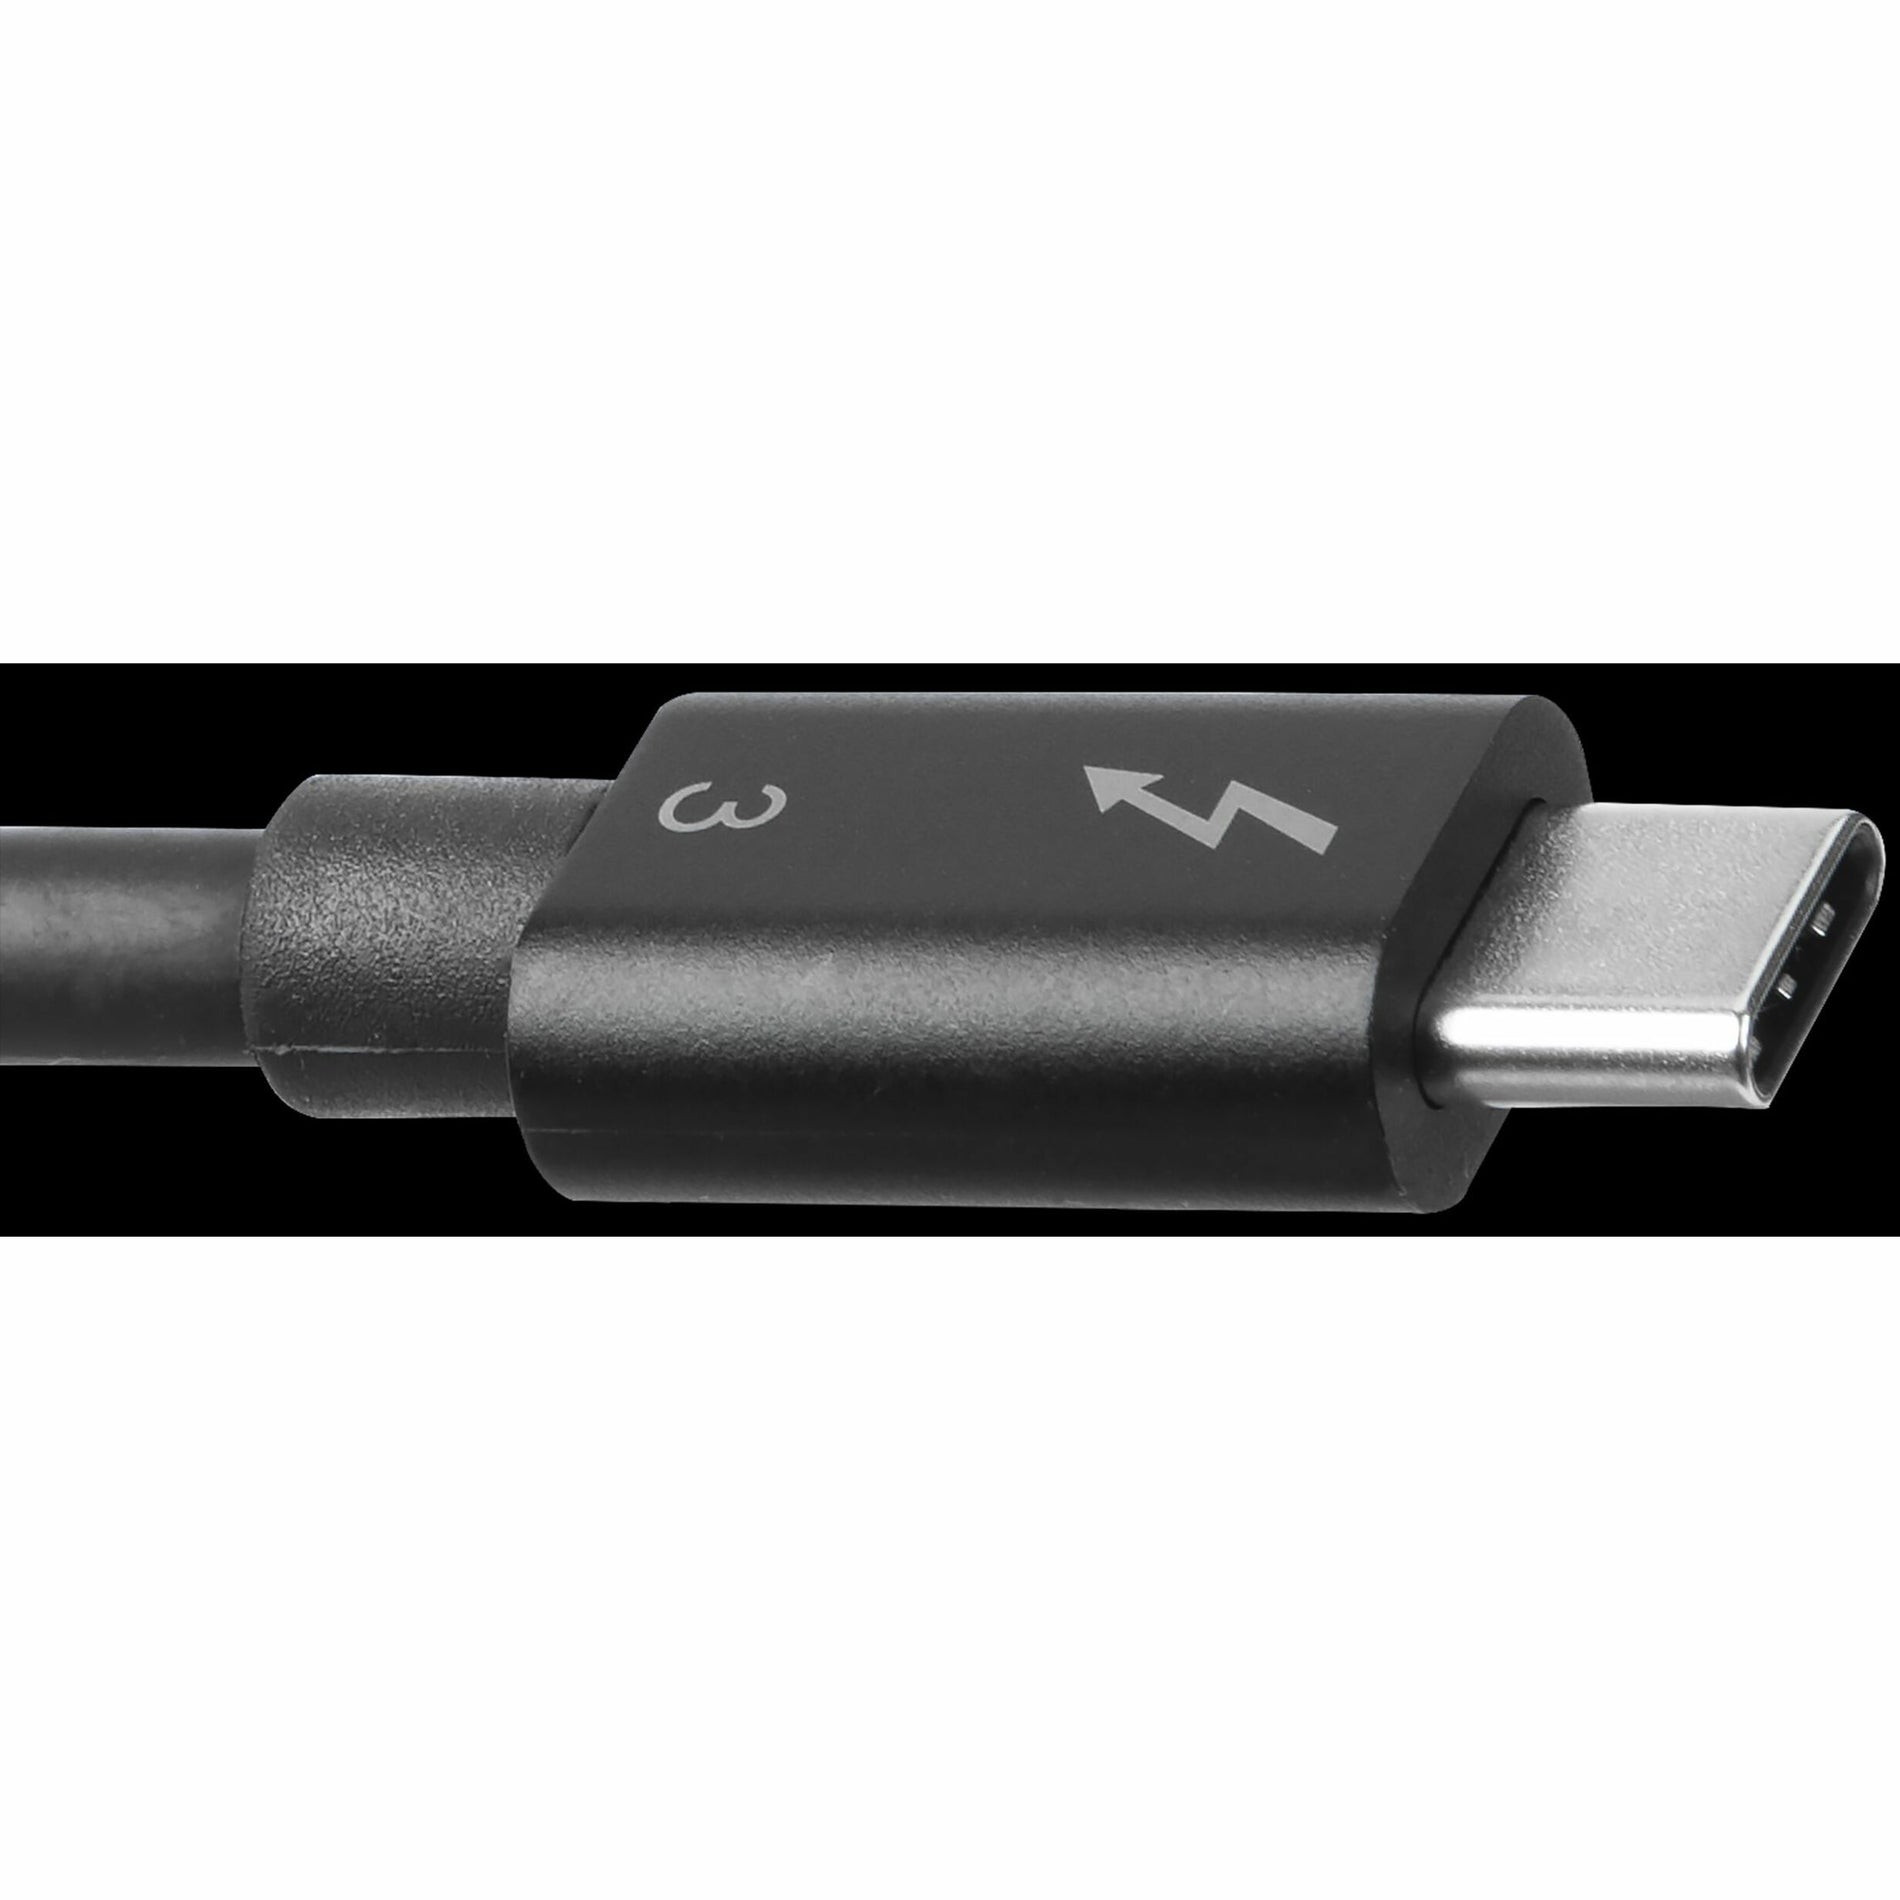 Targus ACC1128GLX 0.8M USB-C Male to USB-C Male Thunderbolt 3 Cable, 40Gbps Data Transfer Rate